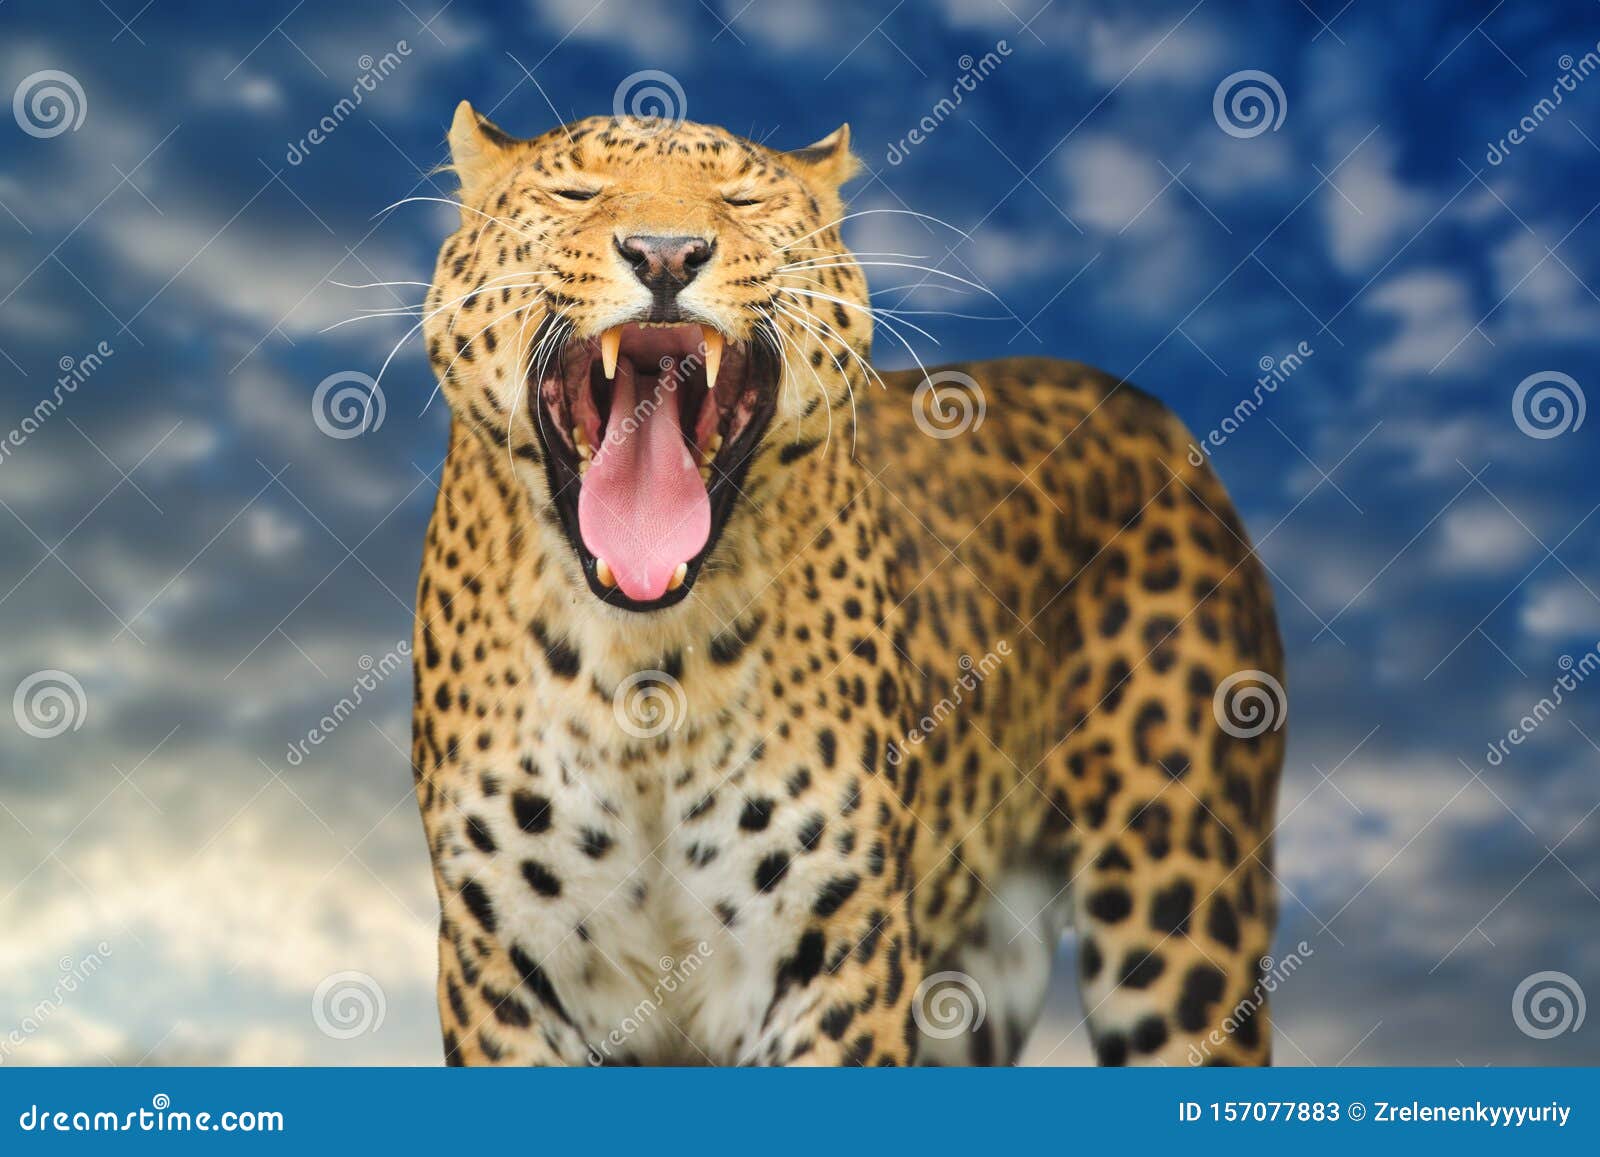 Leopard on the Sky Background Stock Image - Image of mammal, dangerous:  157077883